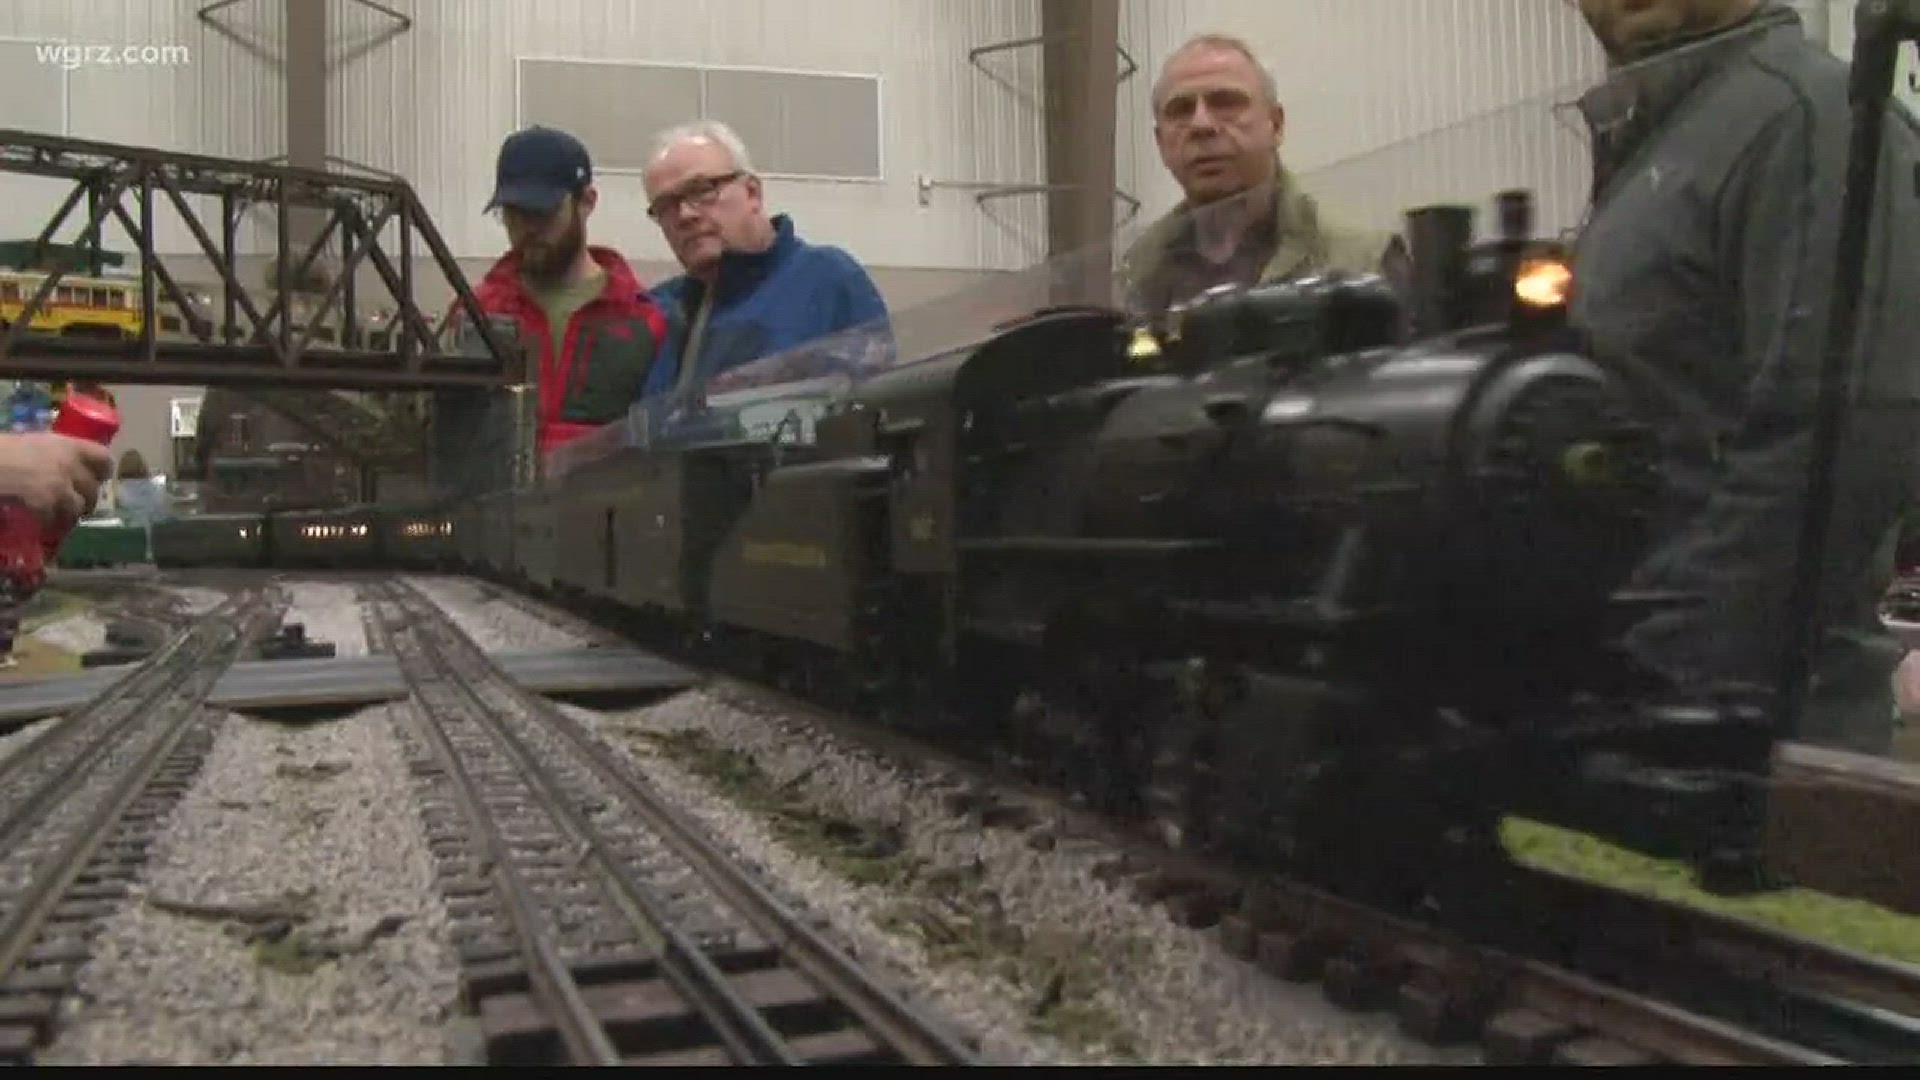 Winter train and toy show at Hamburg Fairgrounds